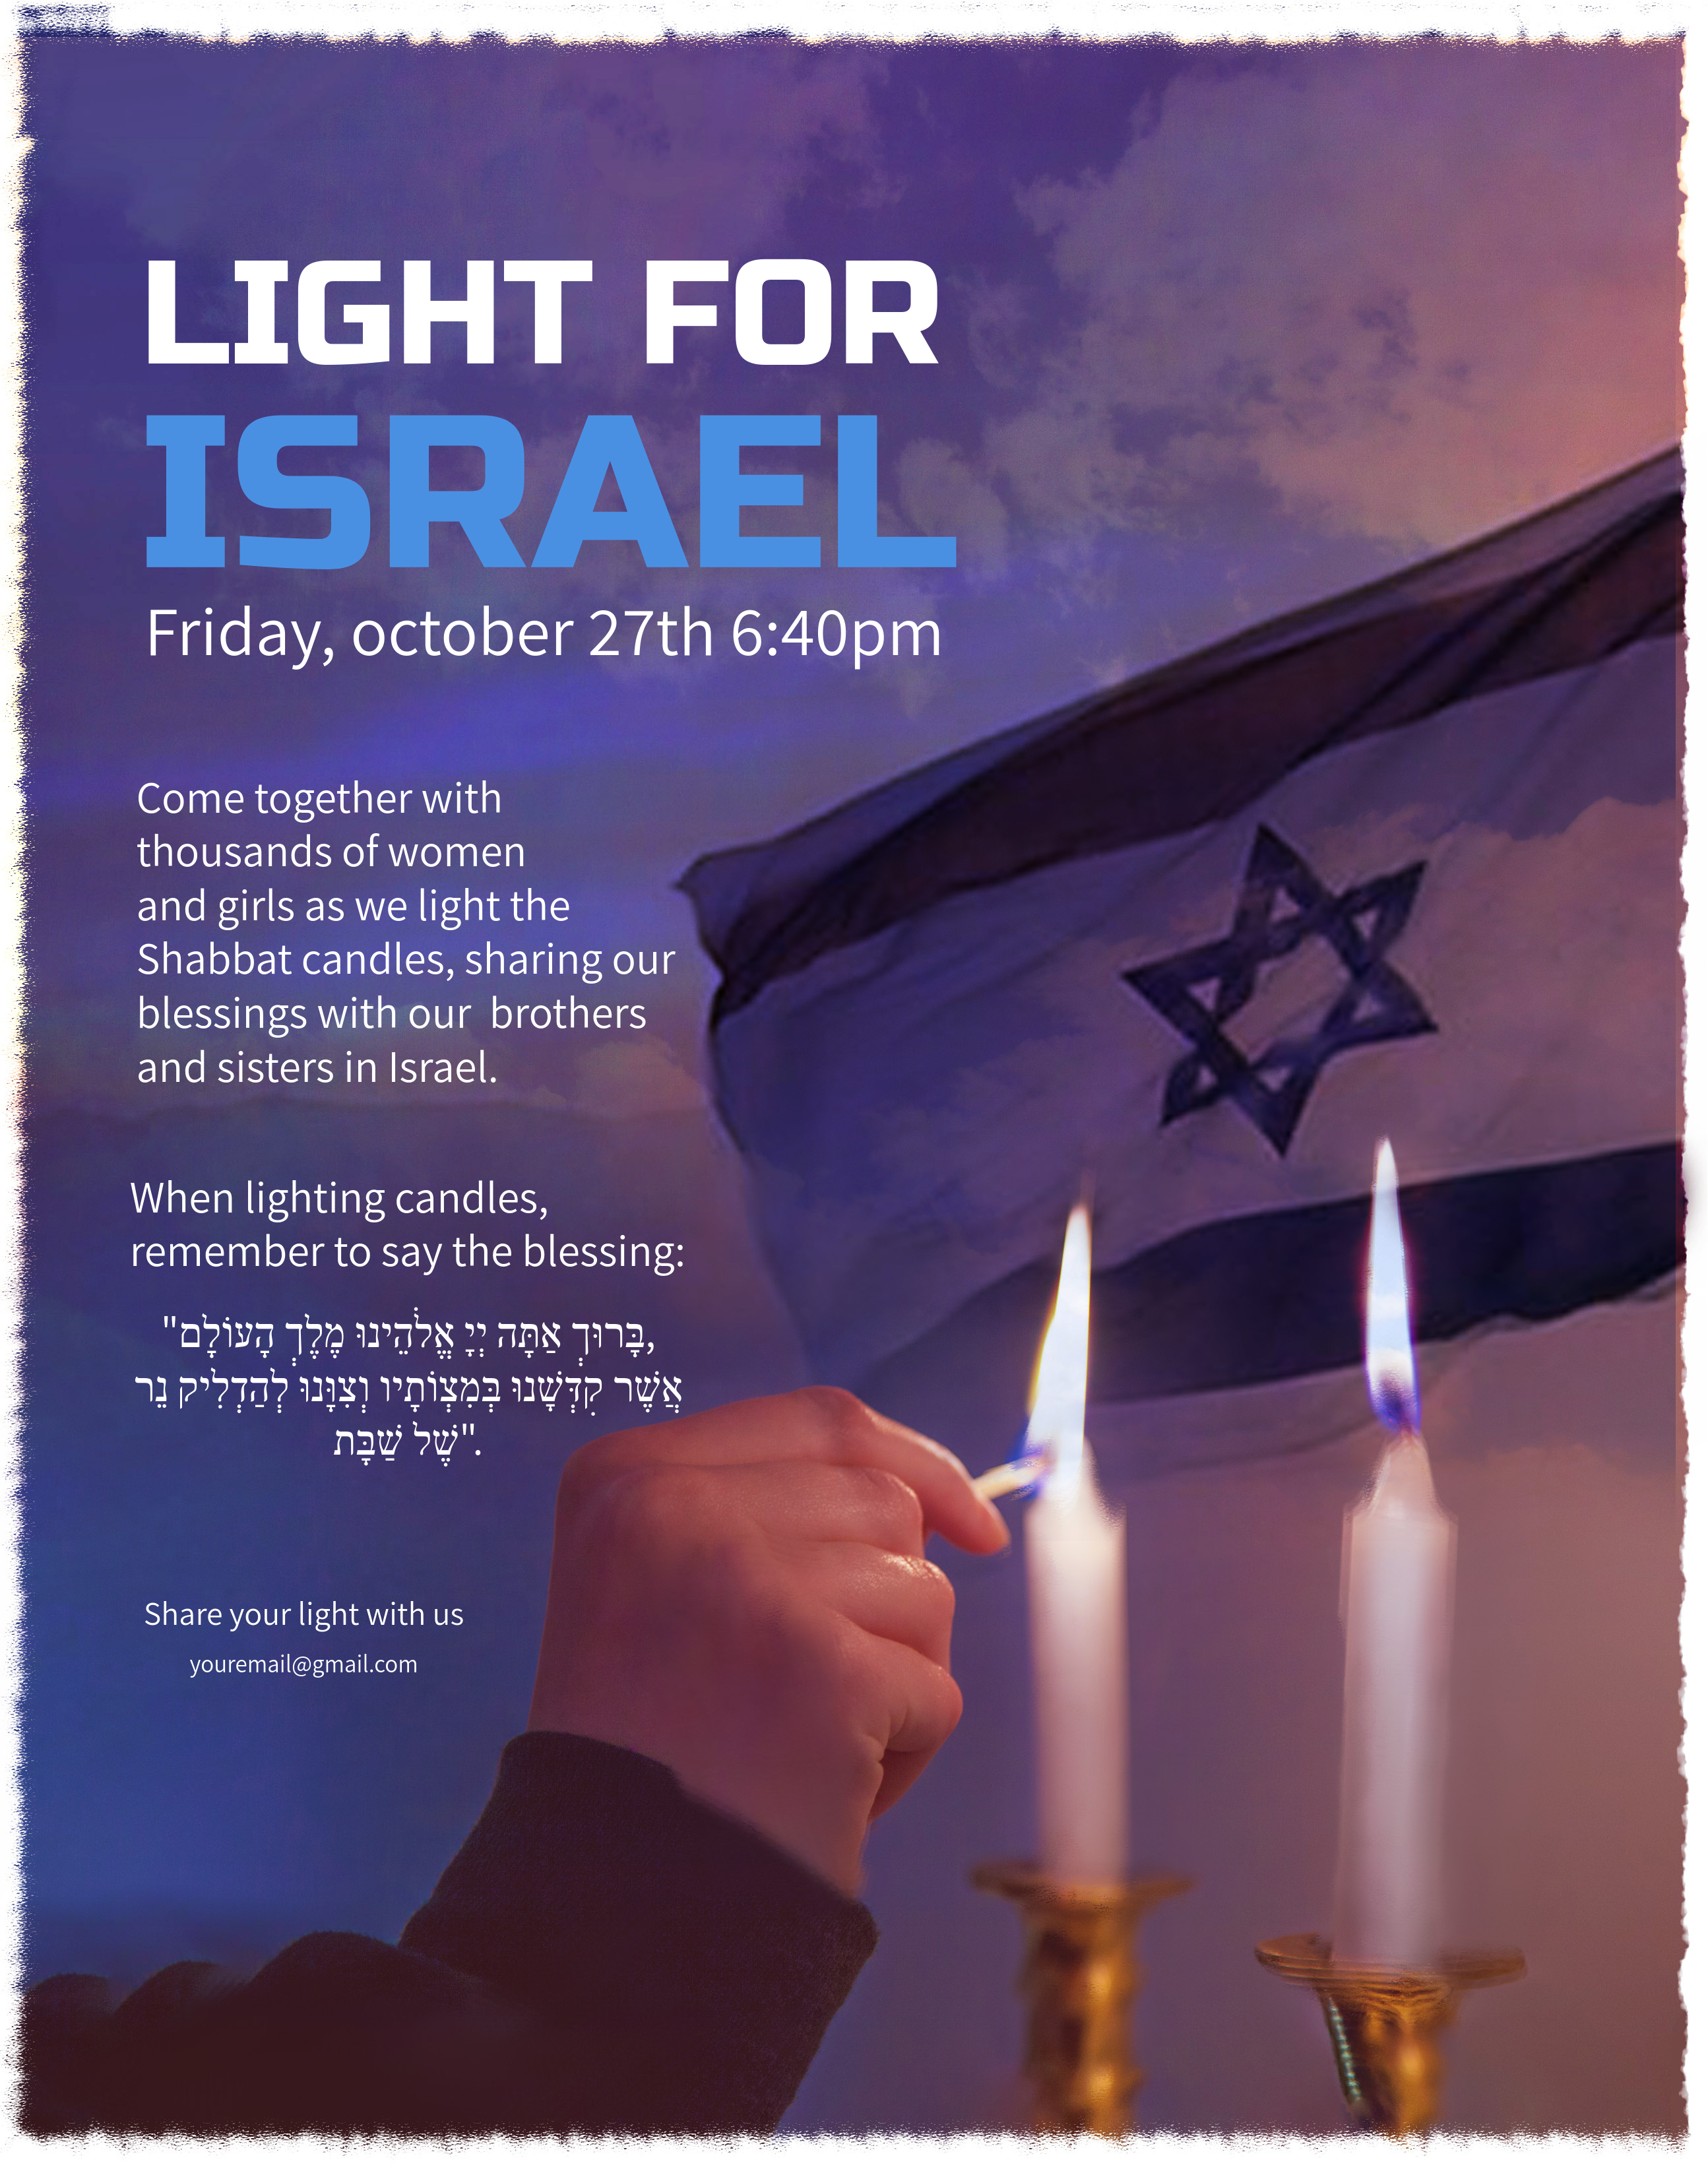 Lighting Candles For Israel